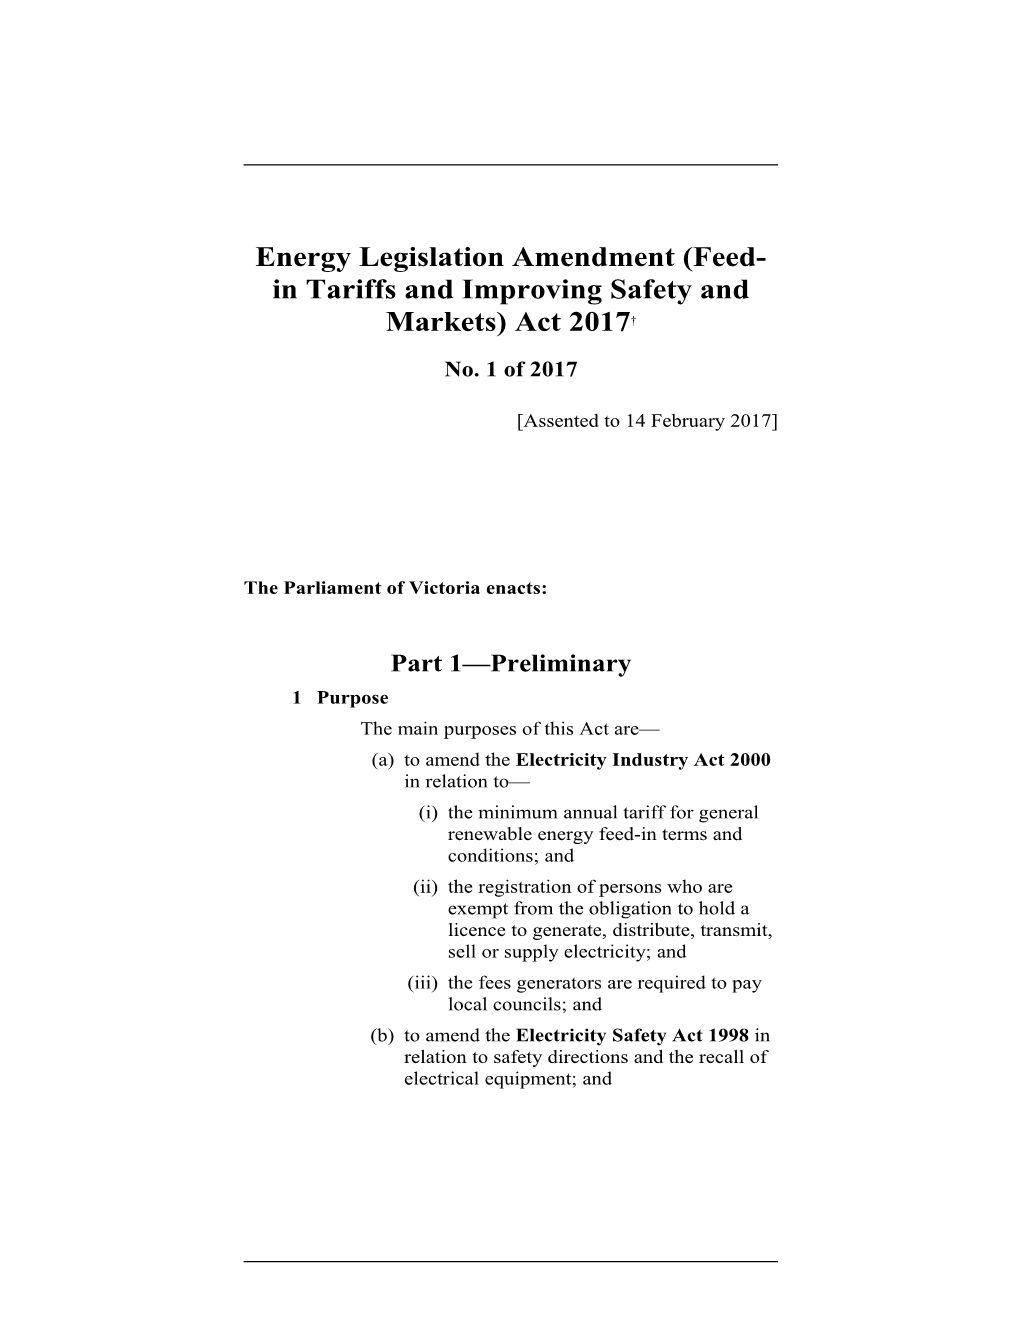 Energy Legislation Amendment (Feed-In Tariffs and Improving Safety and Markets) Act 2017